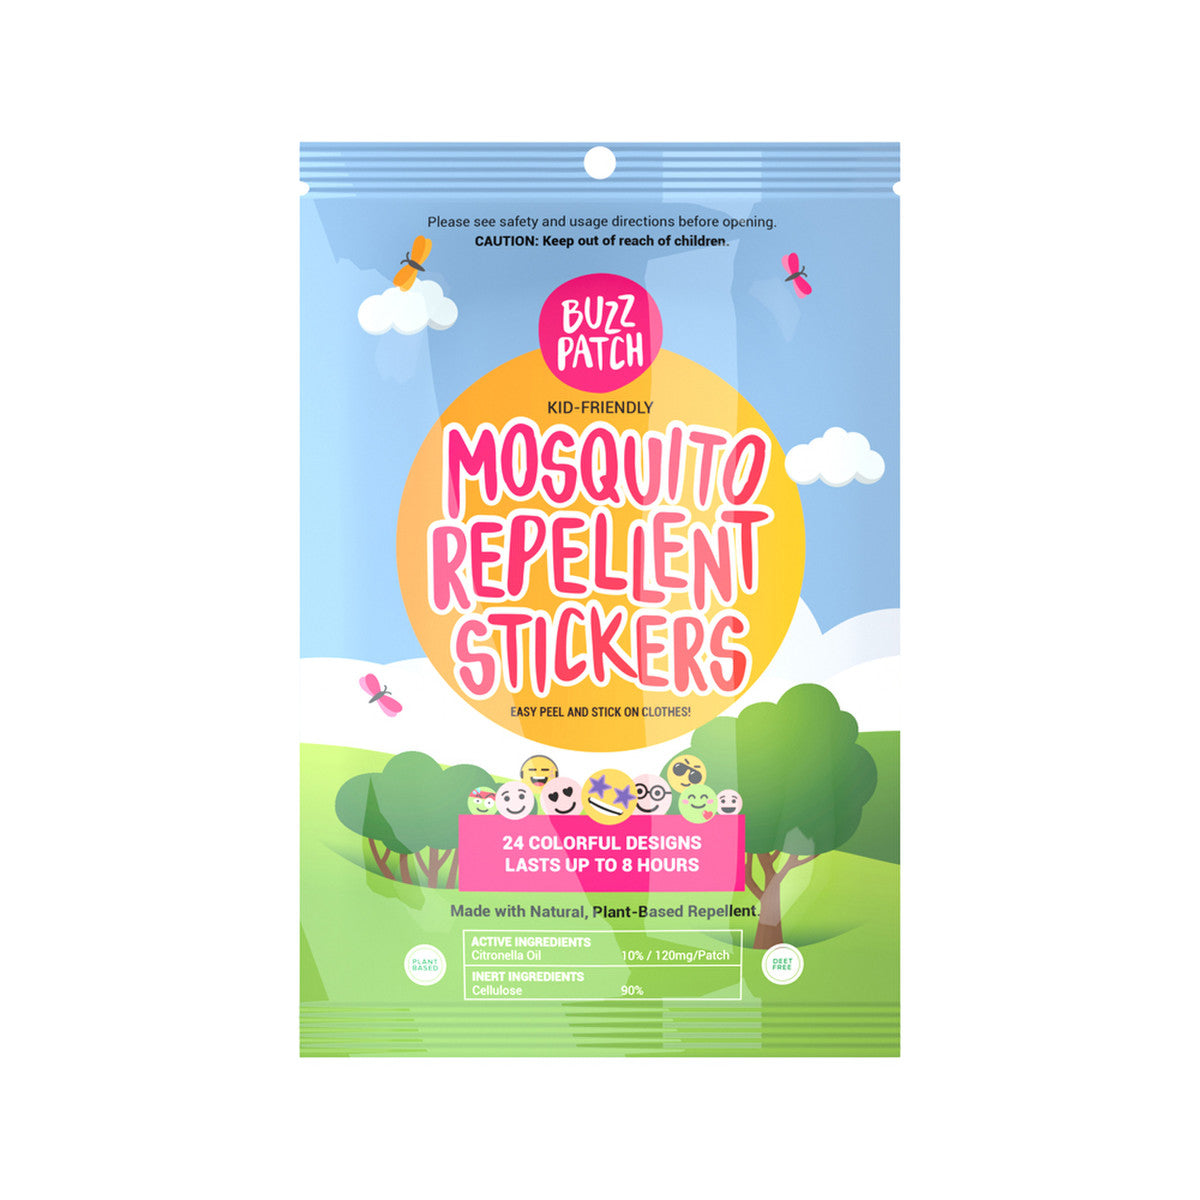 NATPAT (The Natural Patch Co.) - BuzzPatch Organic Mosquito Repellent Stickers